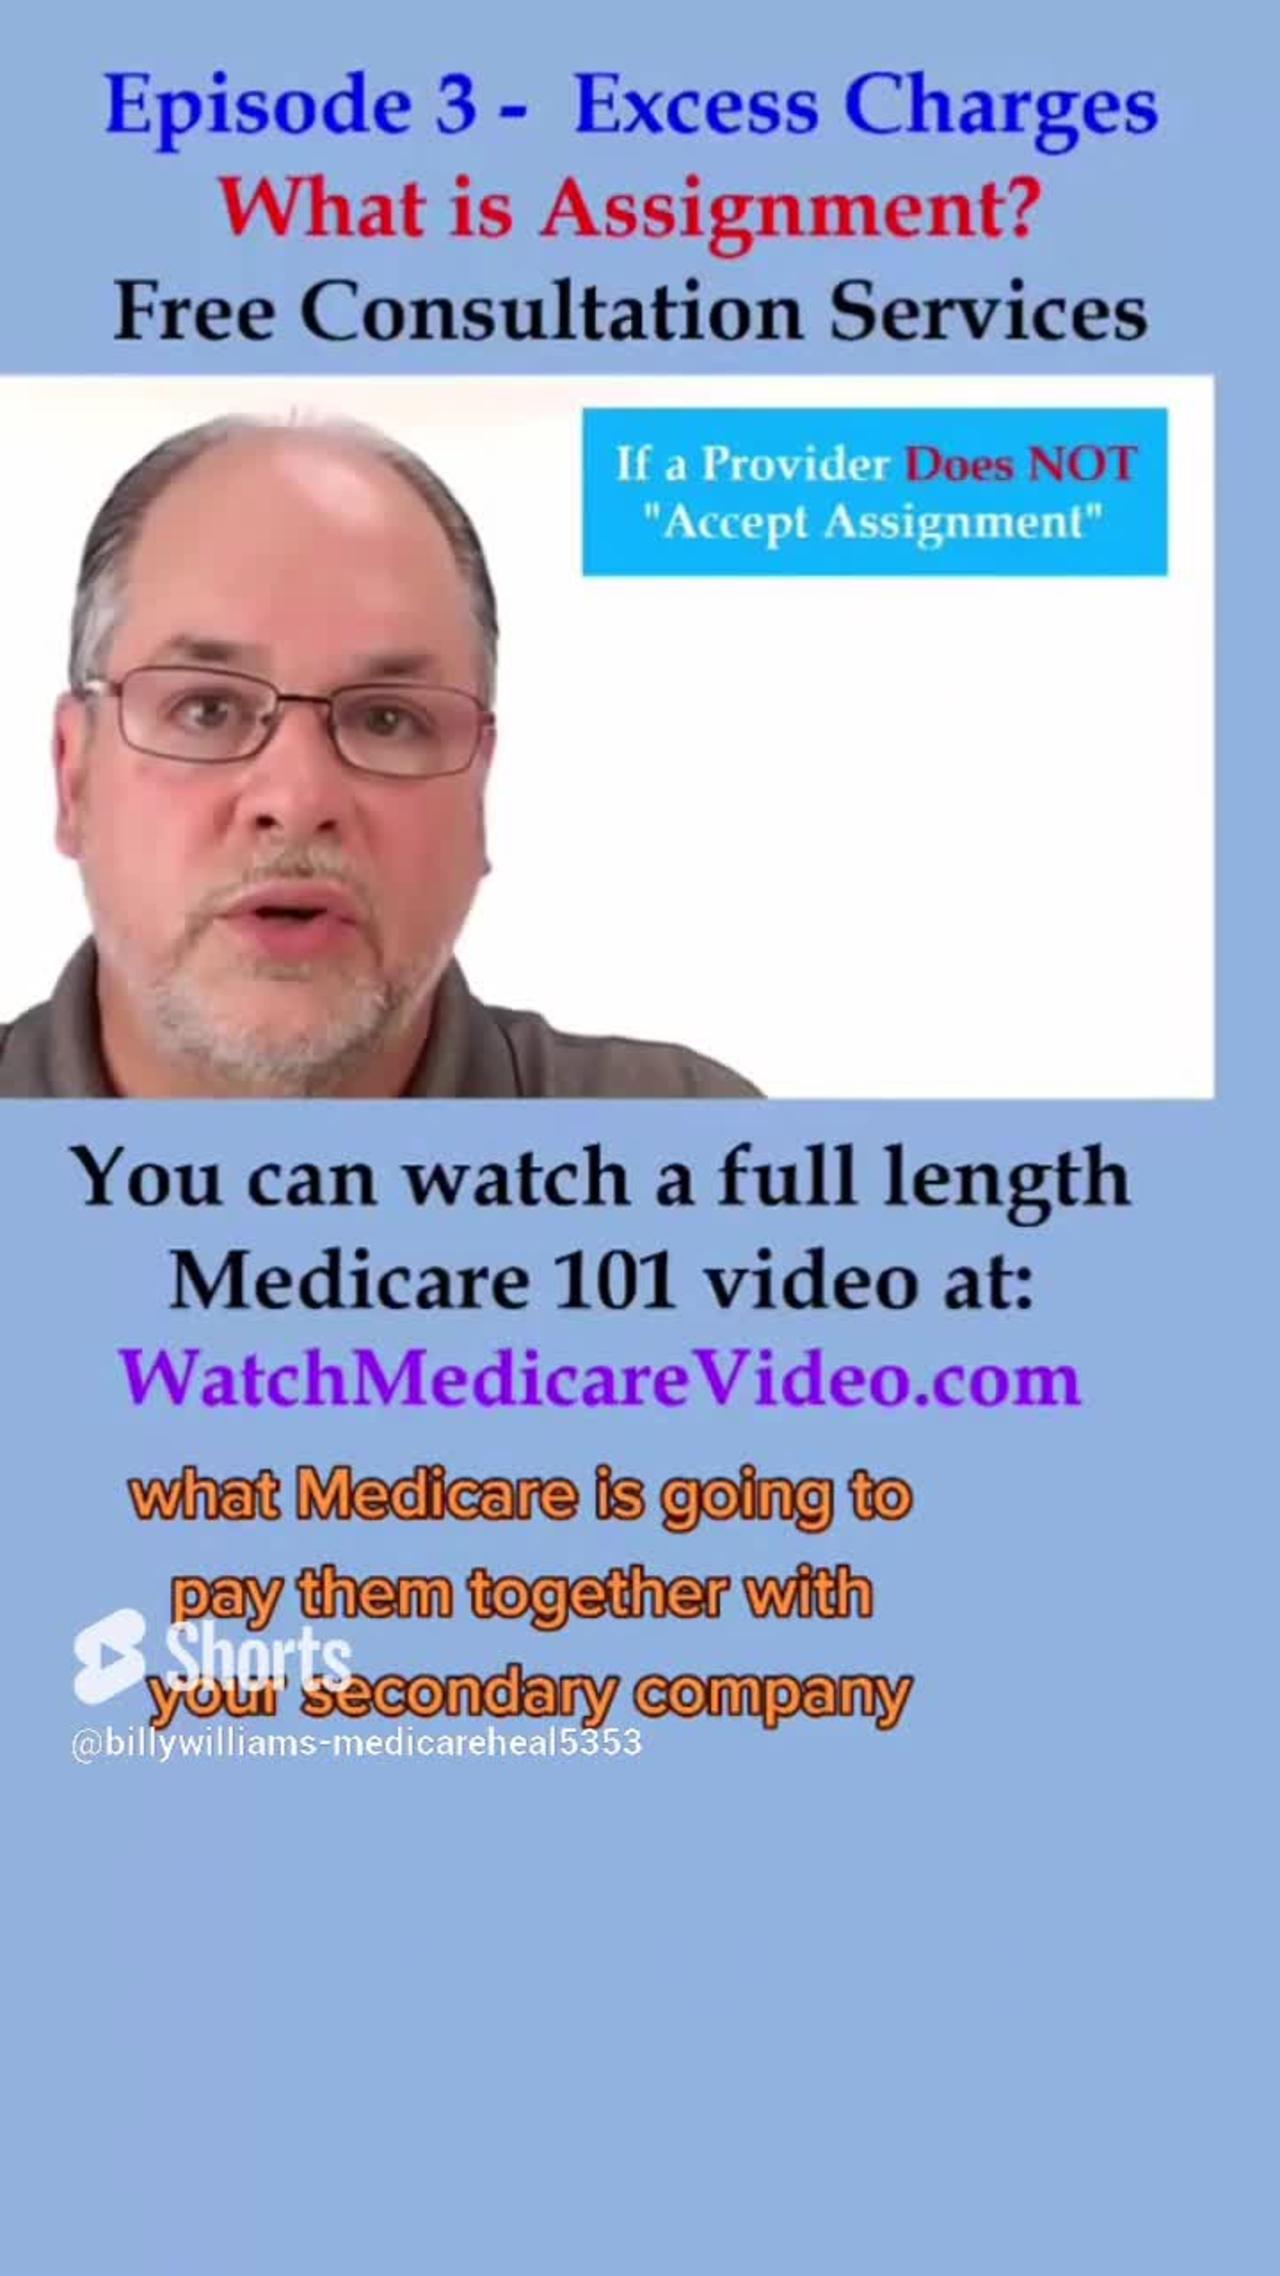 Episode 3 - What is "Assignment" in regards to Medicare Part B Excess Charges?